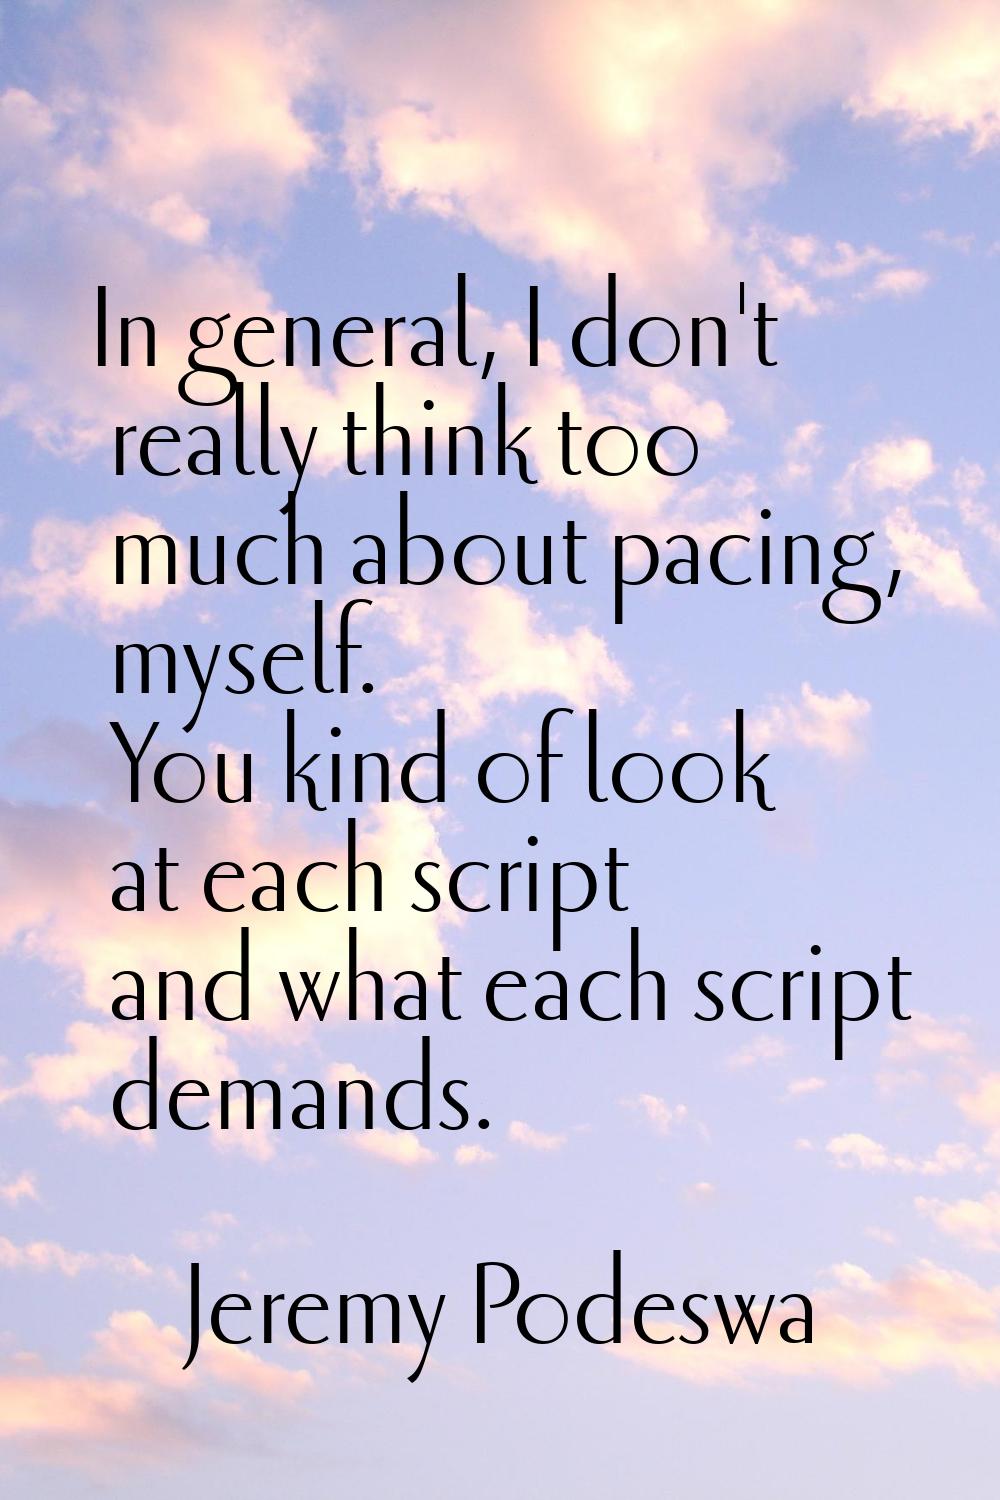 In general, I don't really think too much about pacing, myself. You kind of look at each script and